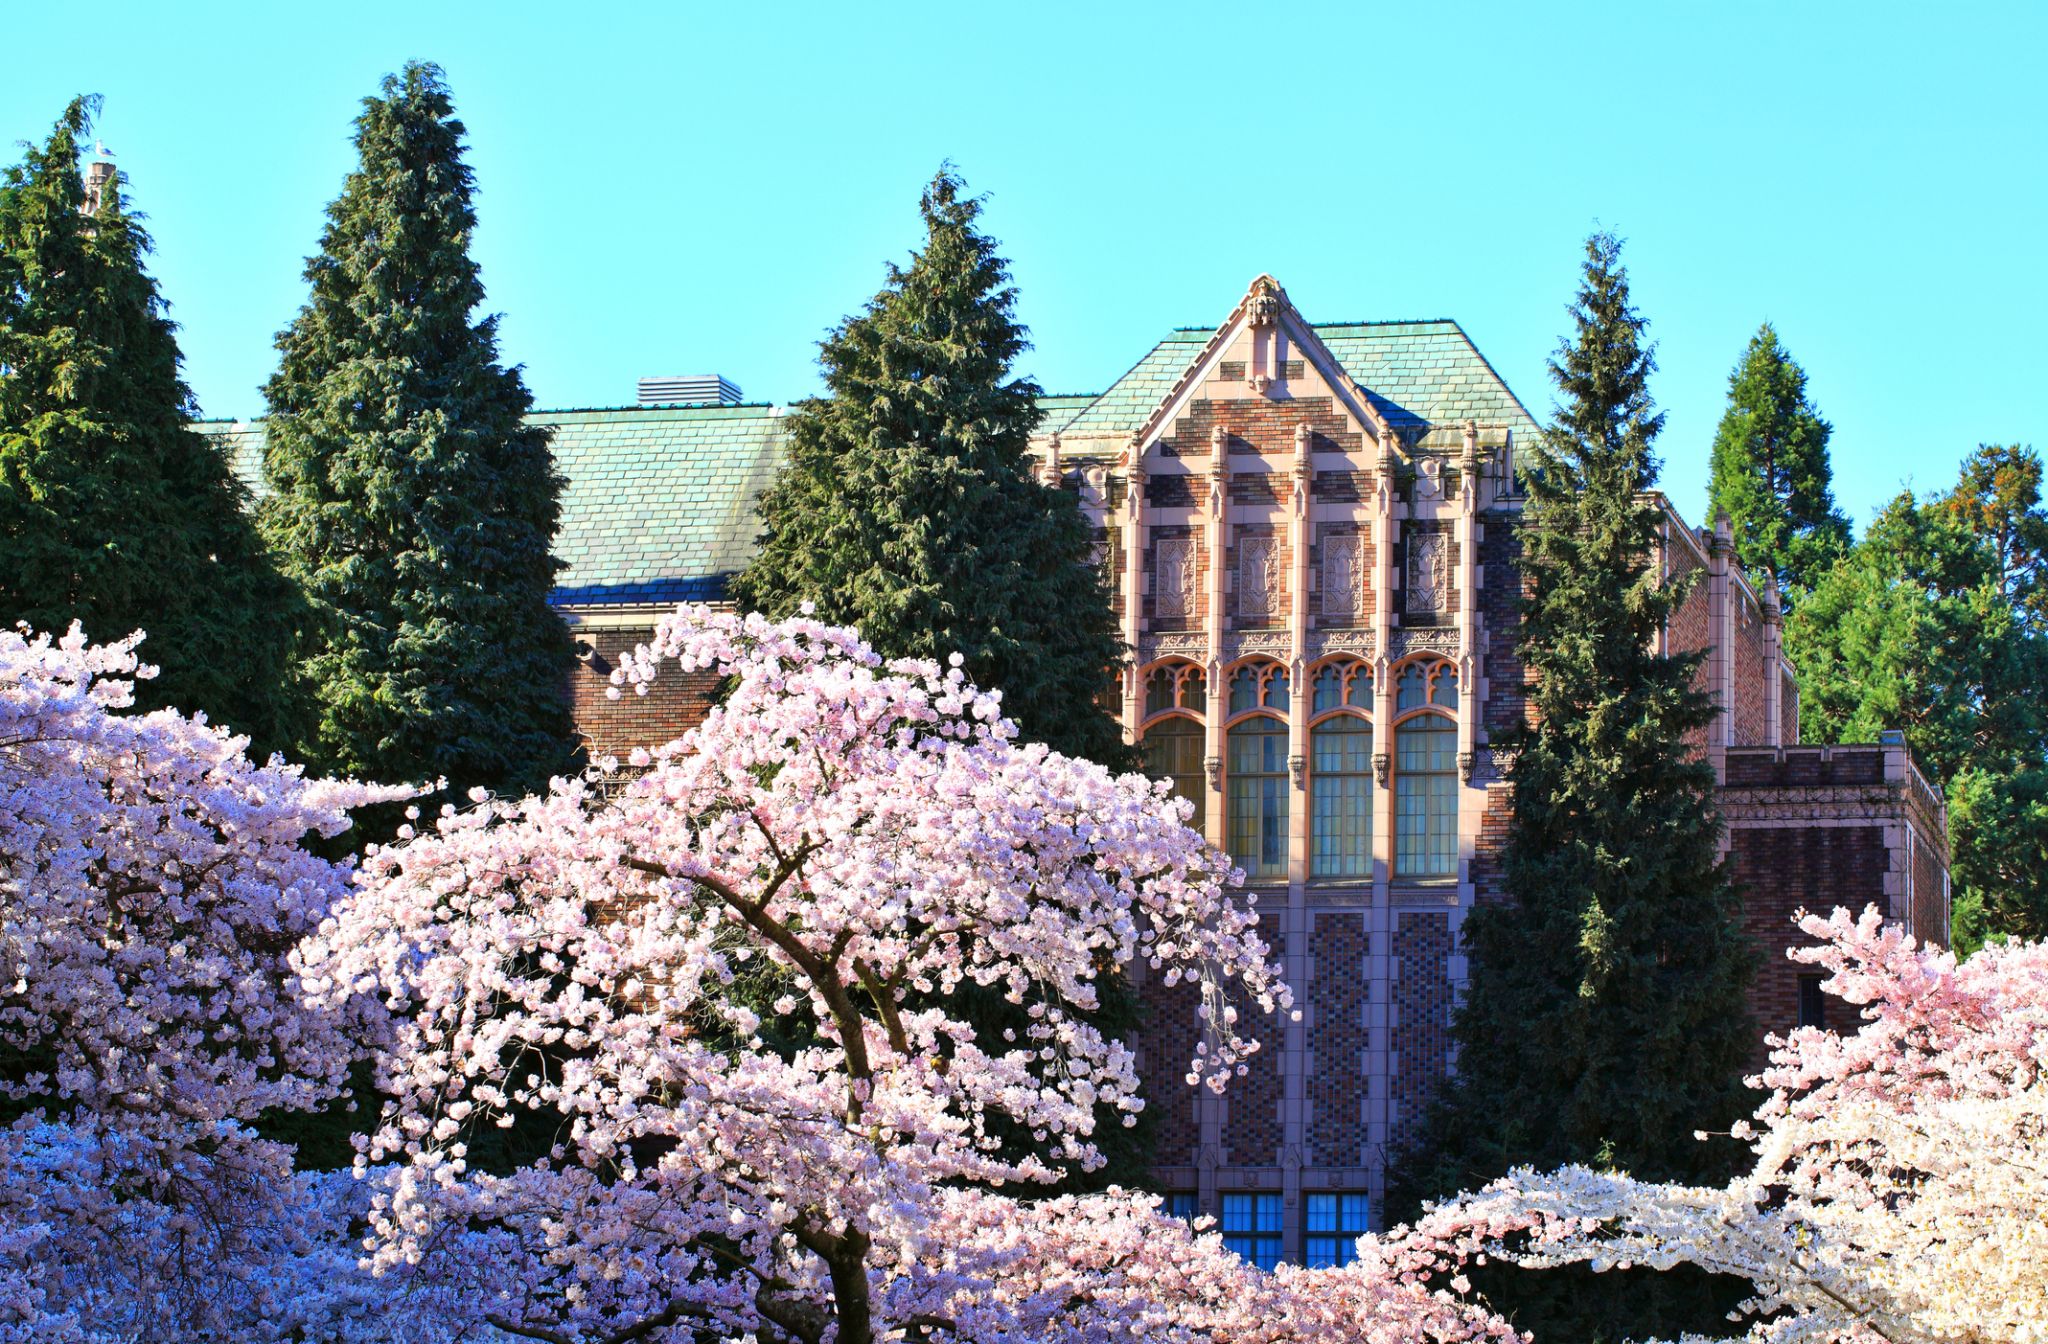 University of Washington urges Seattle to seek out cherry blossoms